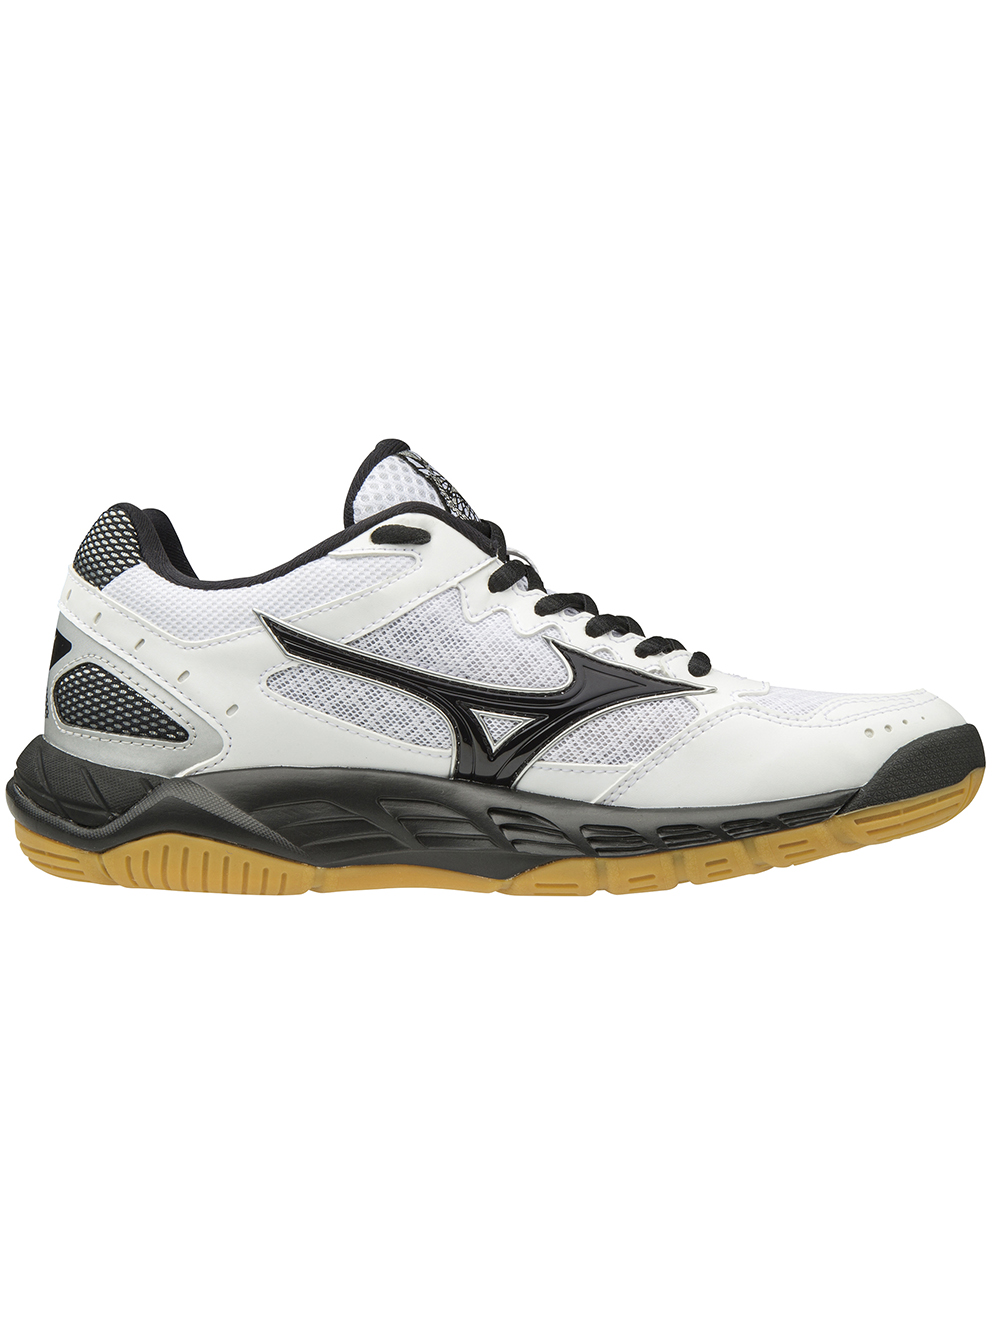 black and white mizuno volleyball shoes